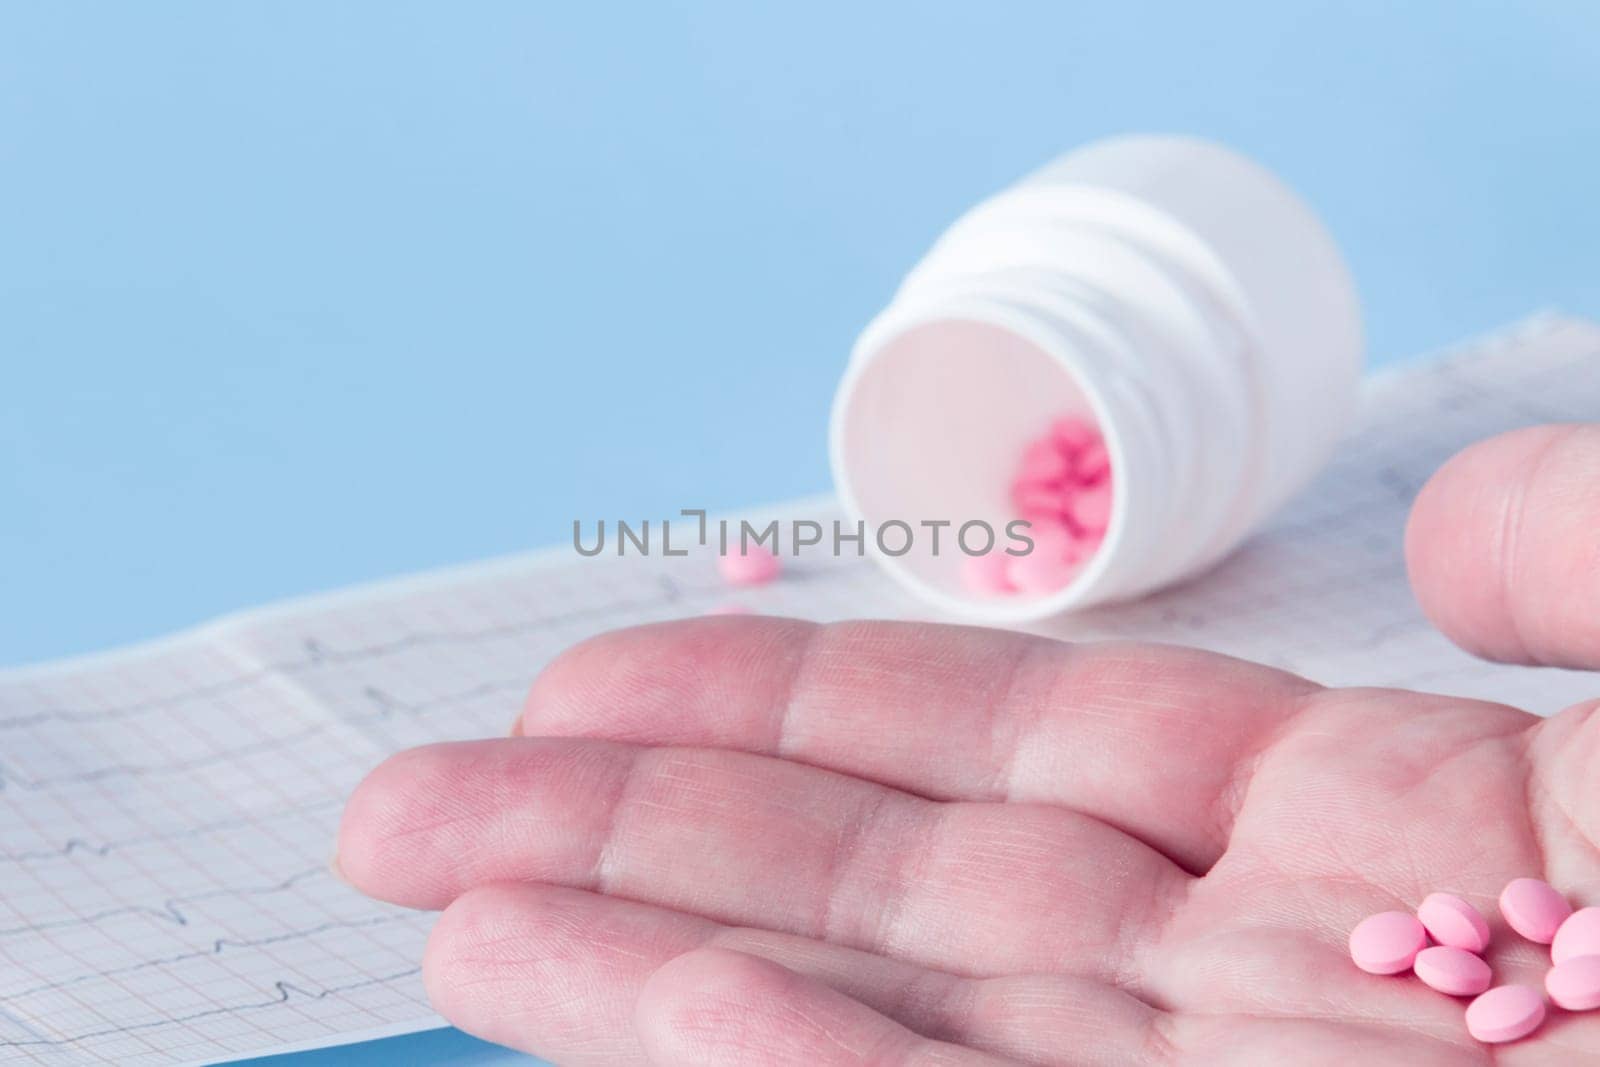 A hand pours a handful of pink pills from a white jar onto an electrocardiogram of the heart, on a blue background. The concept of a healthy lifestyle and timely medical examination